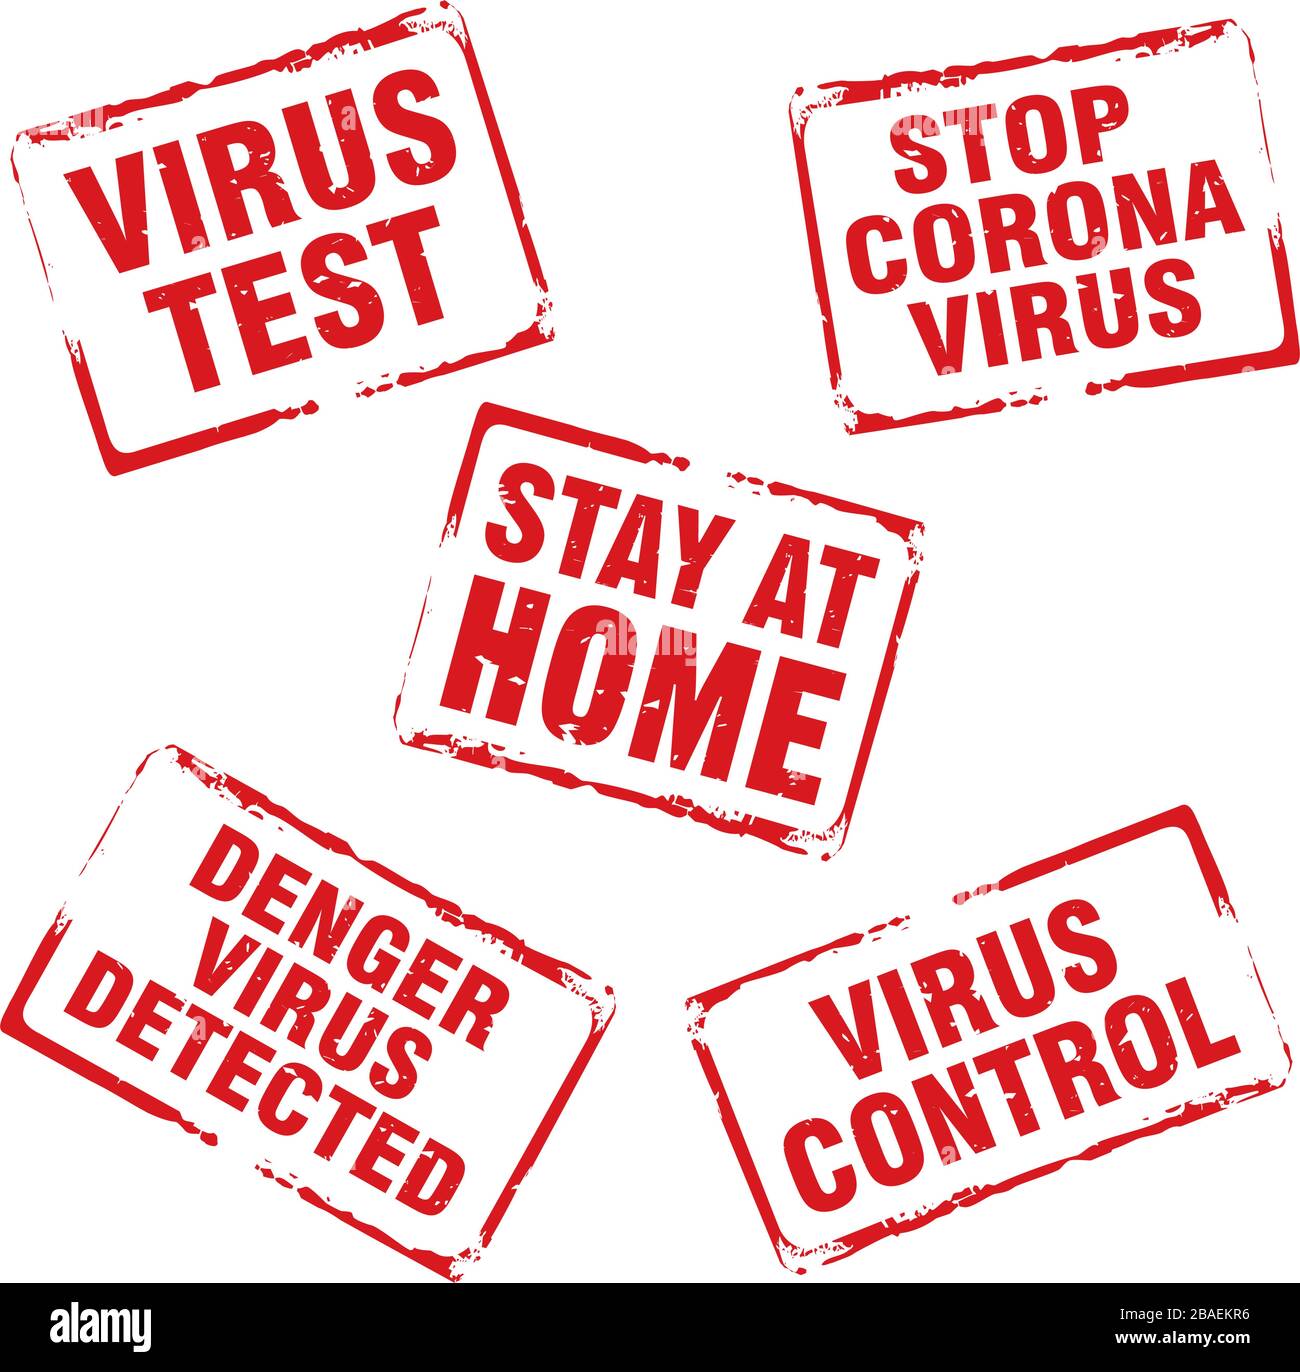 Red stamp and text STOP CORONA VIRUS, STAY AT HOME, VIRUS TEST. Vector Illustration. Stock Vector